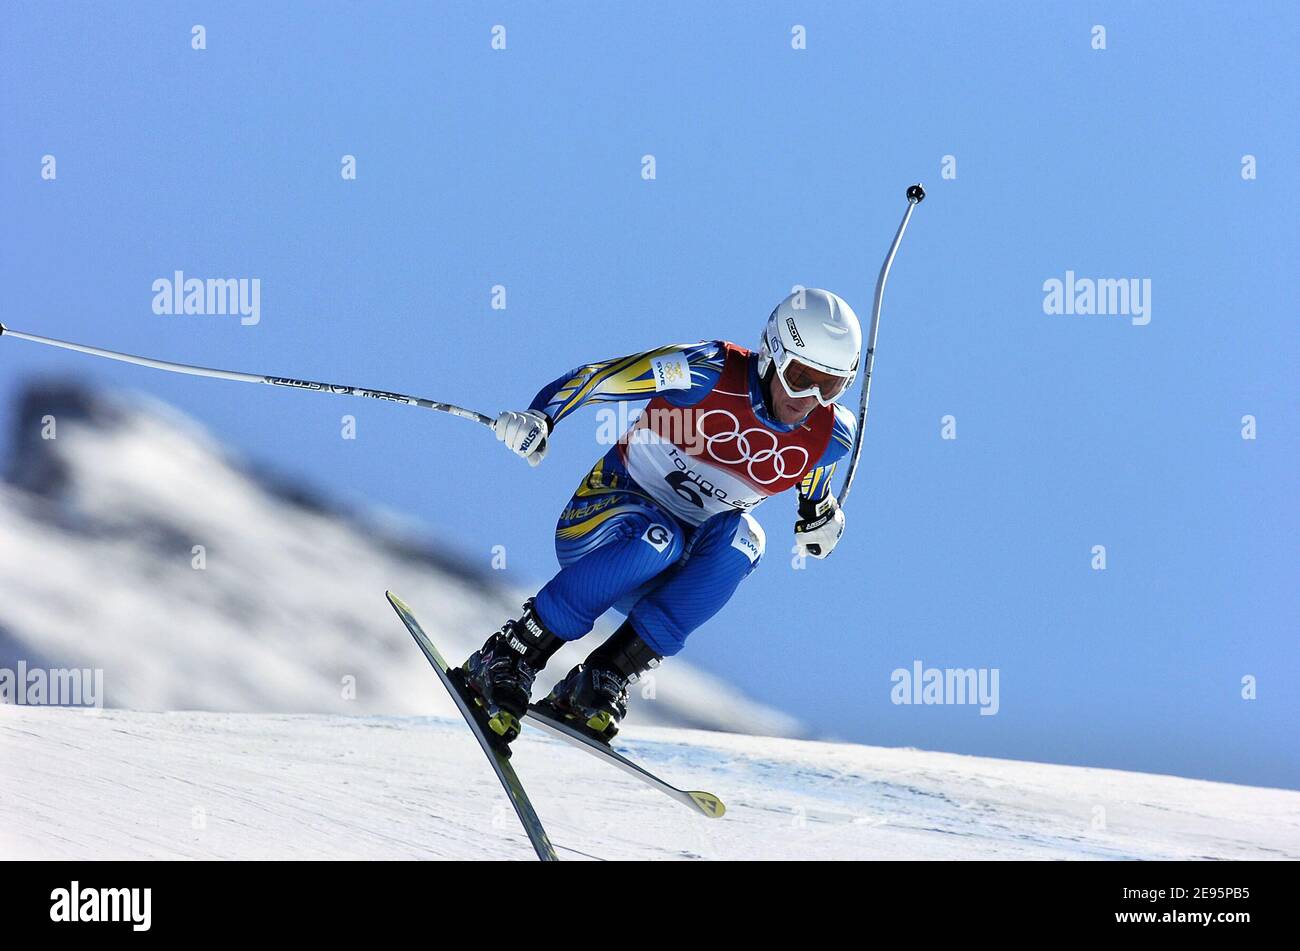 Italy's Kristian Ghedina during the training run for the men's downhill at the Turin 2006 Winter Olympic Games in Sestriere Borgata, Italy, on February 10, 2006. Photo by Gouhier-Nebinger-Orban/ABACAPRESS.COM Stock Photo